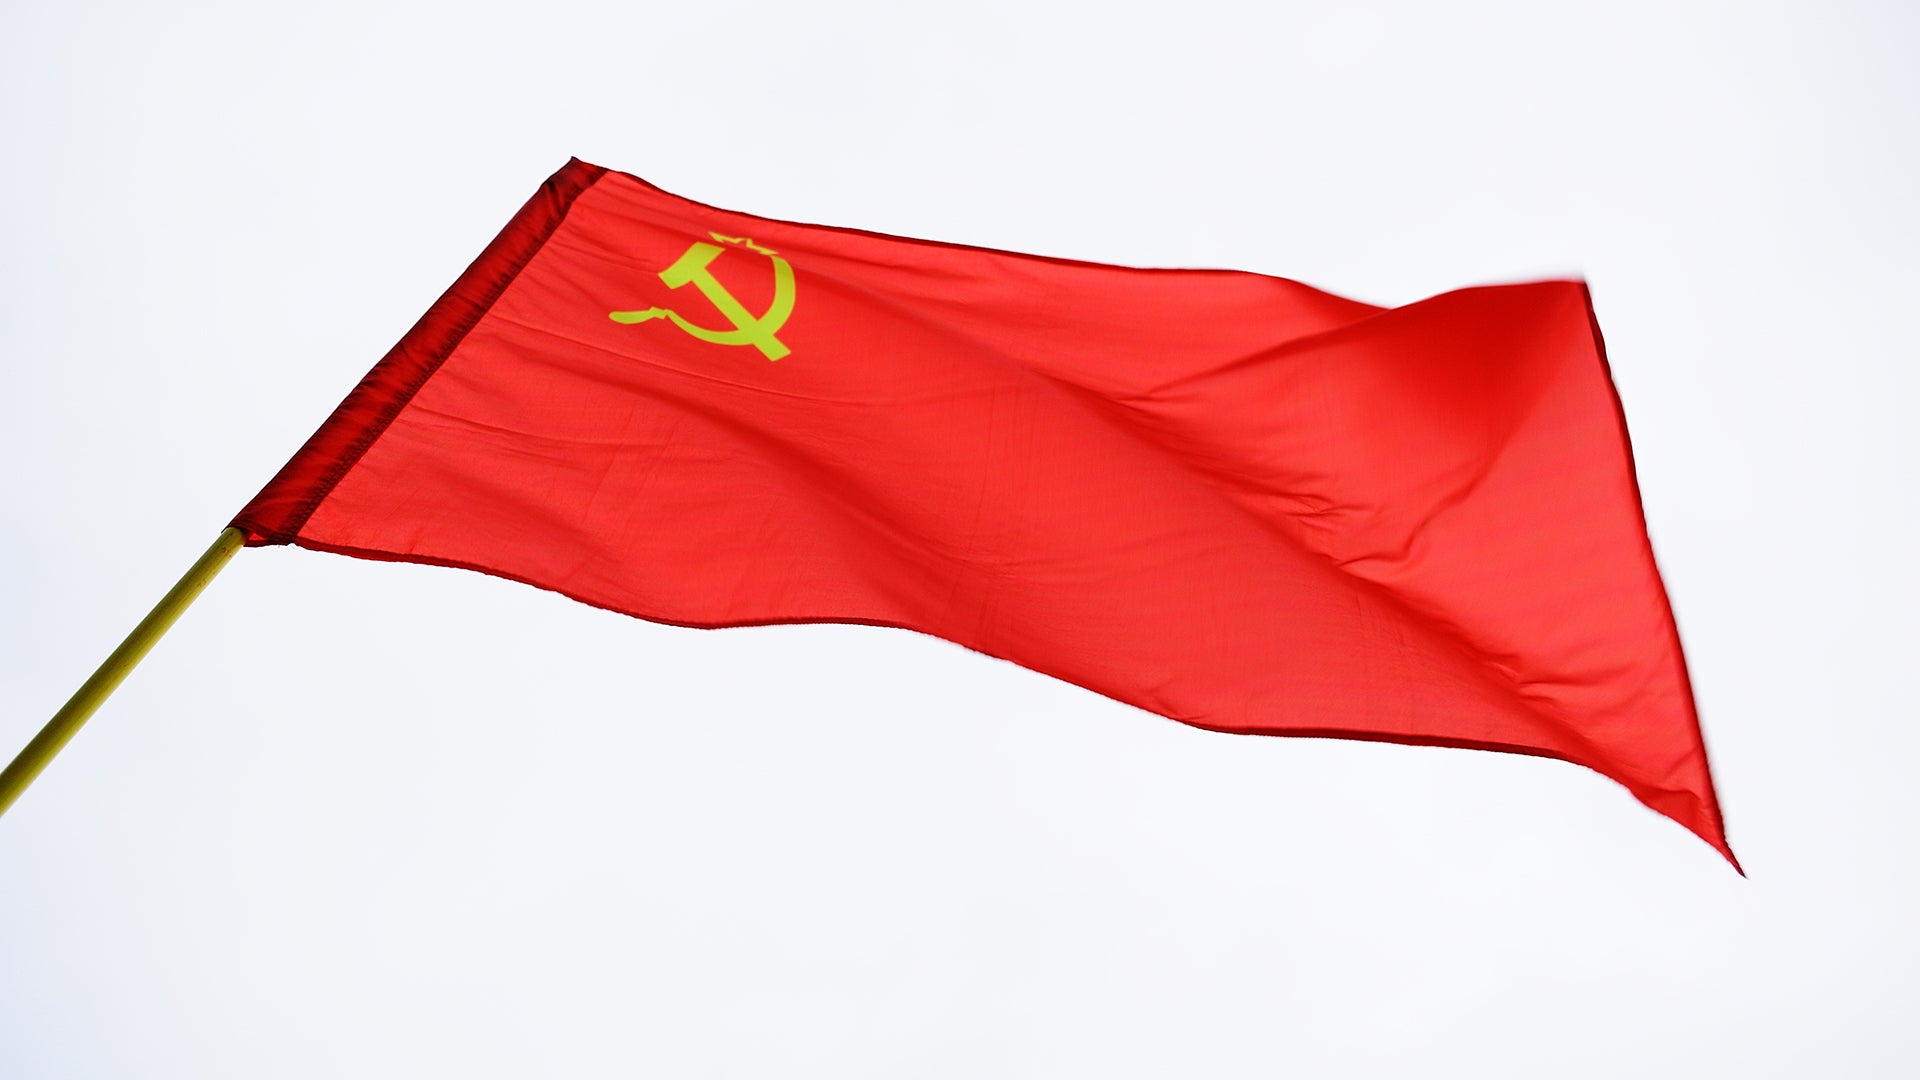 An image of the Soviet flag.